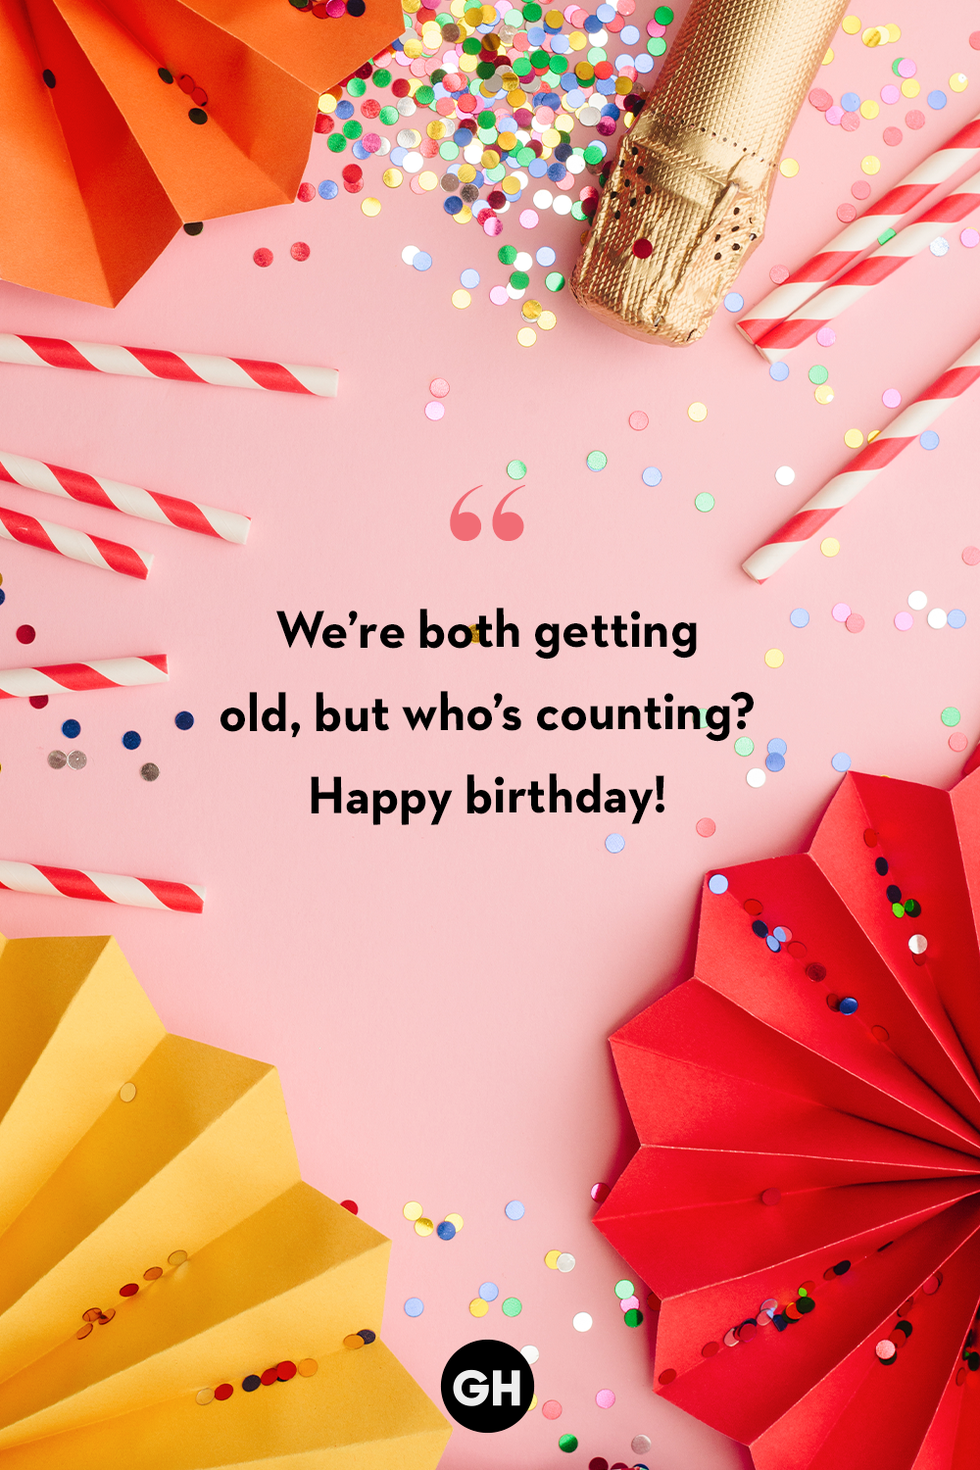 Ultimate Compilation: Over 999 Unique Birthday Wishes Images for Your Friend – Stunning Collection of Full 4K Birthday Wishes Images for Friend